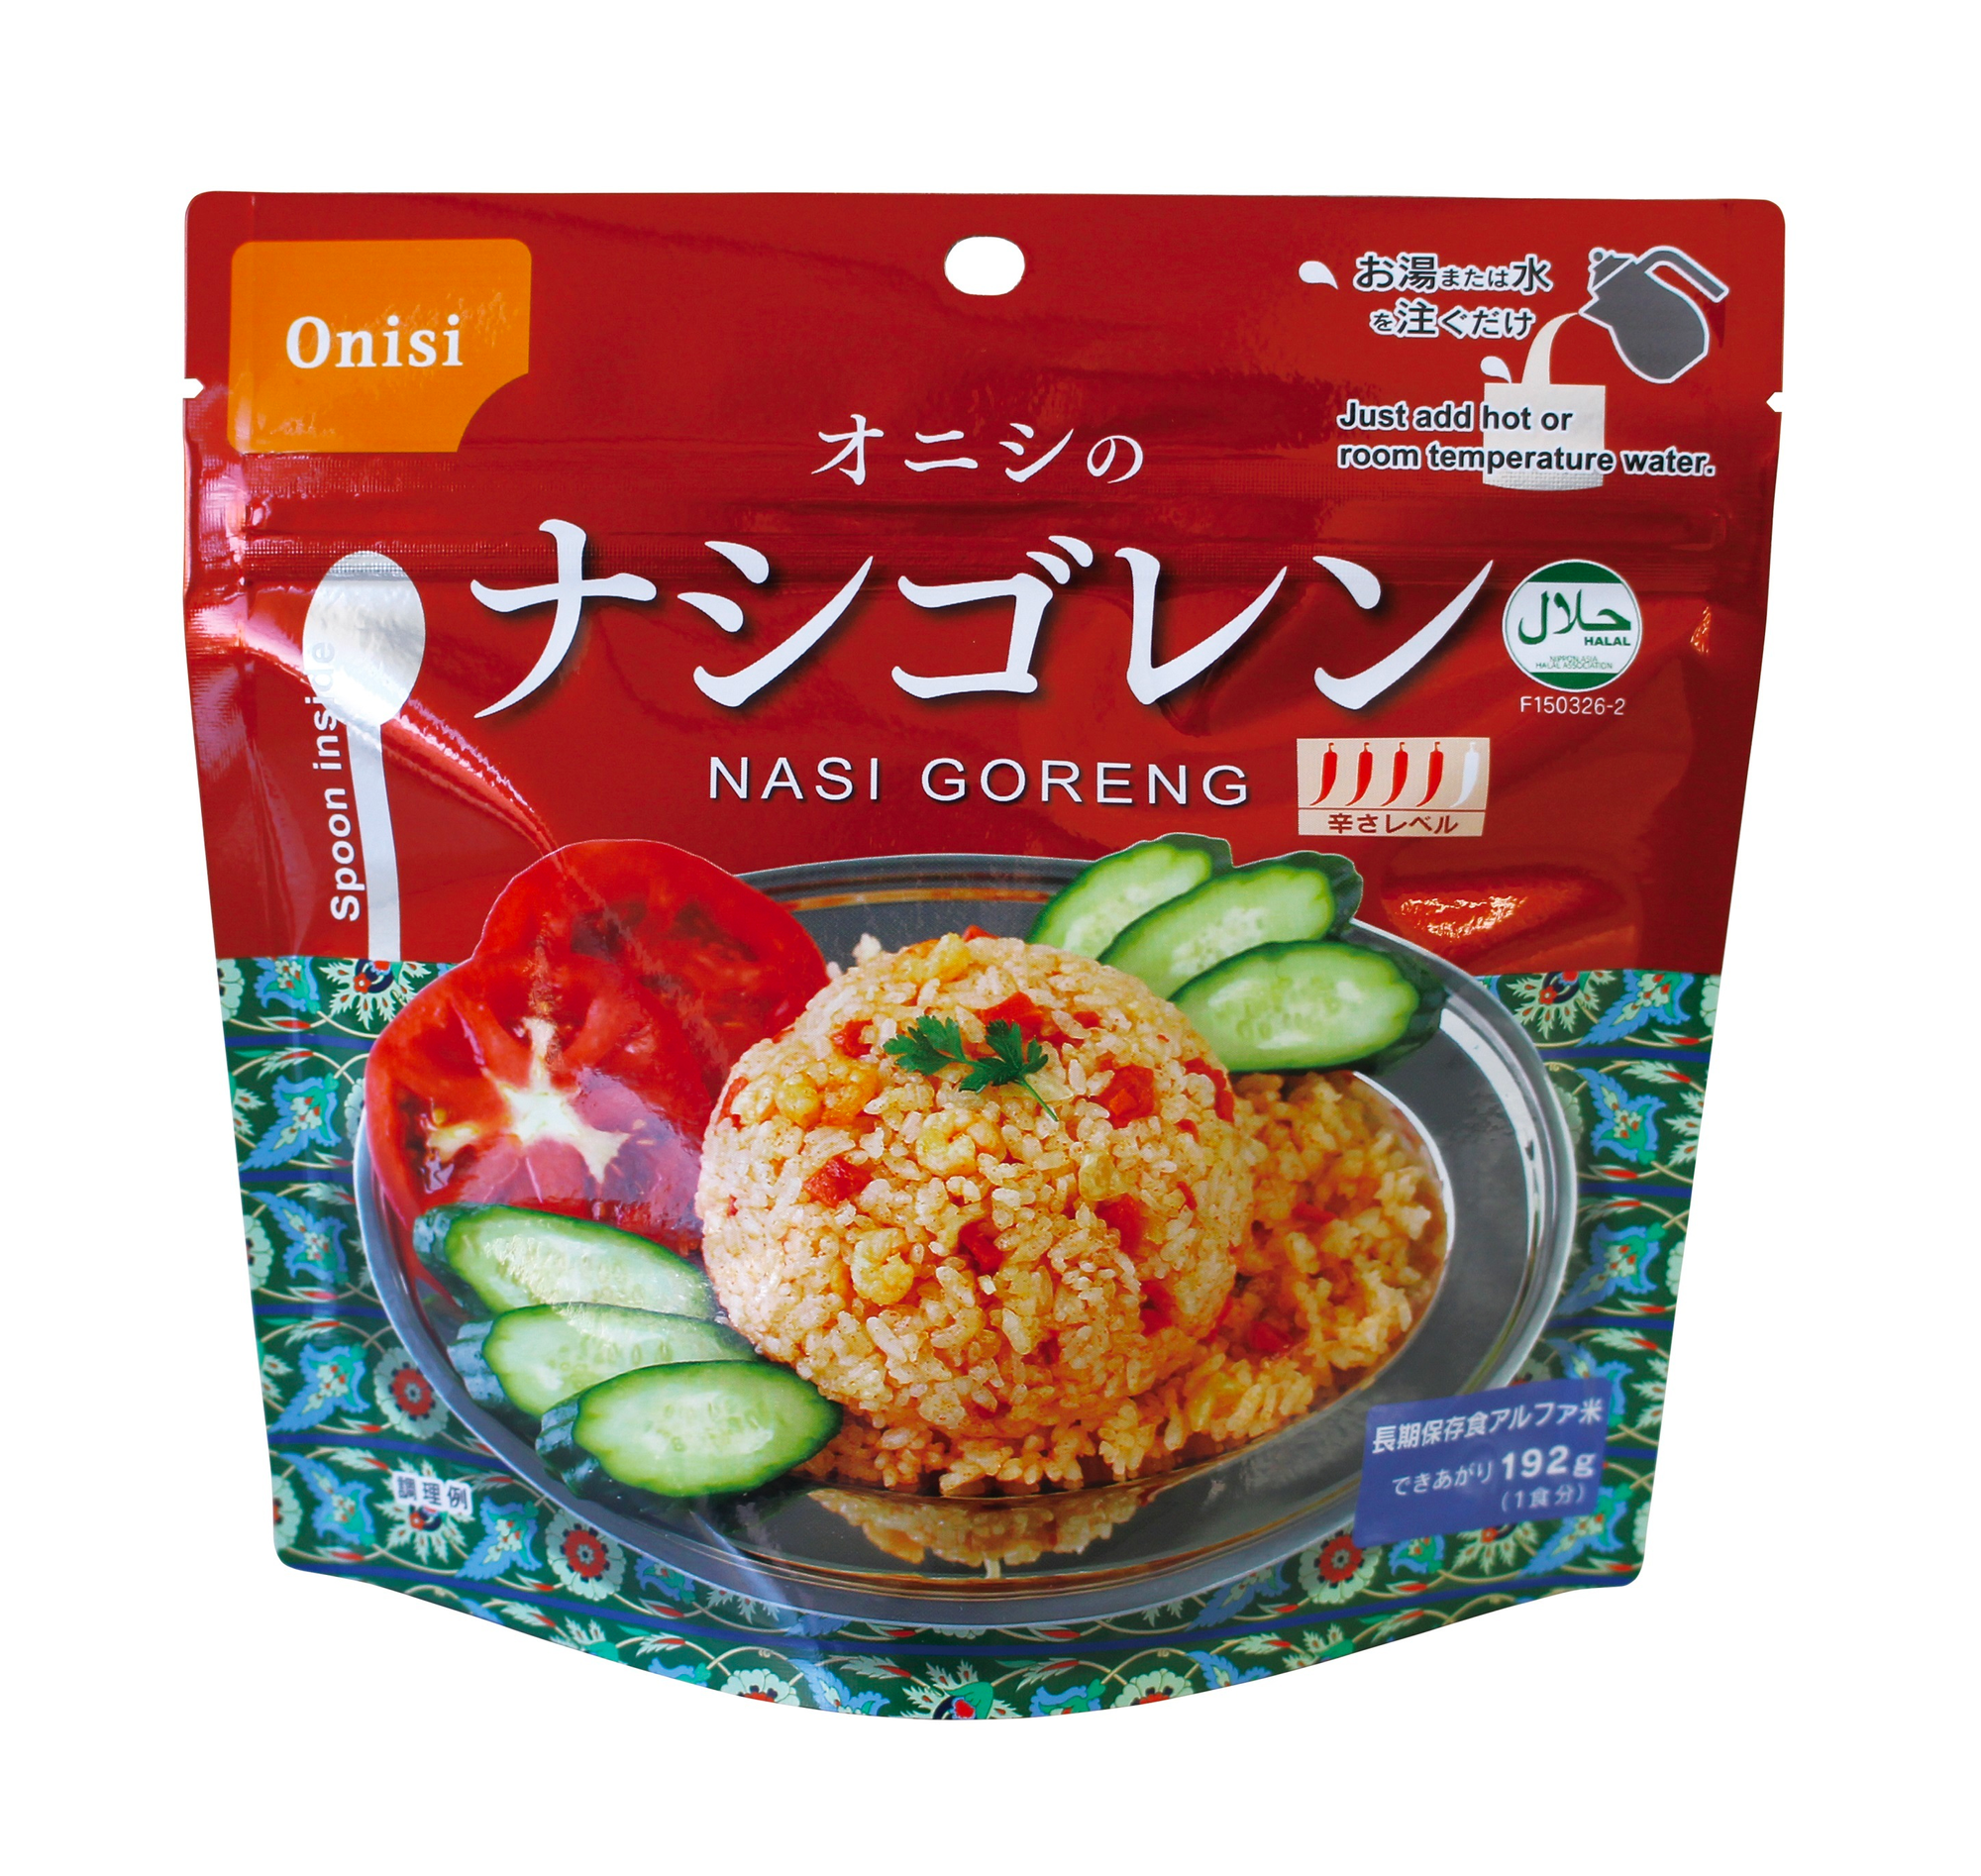 6 Disaster Prevention Goods Including Halal Emergency Food in Japan You Need To Have